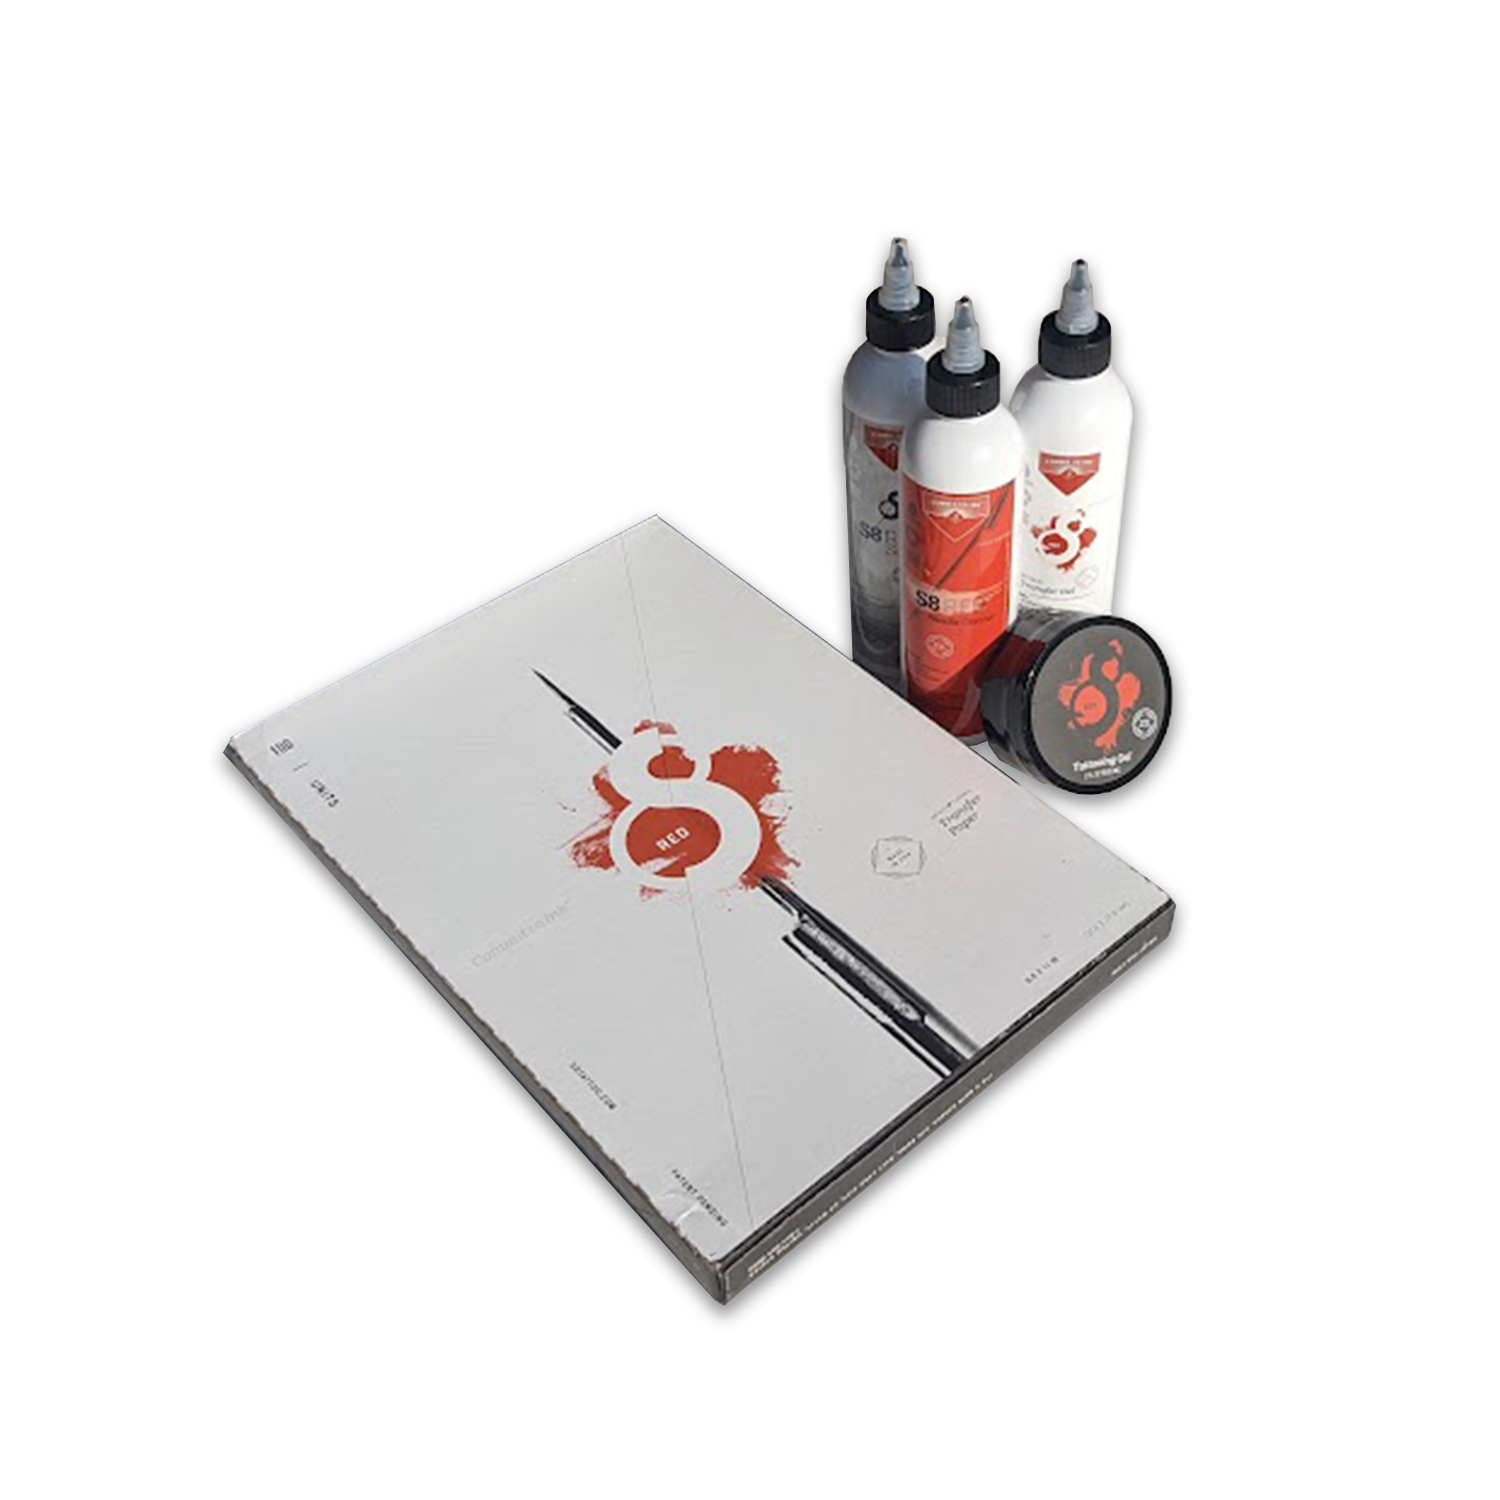 S8 RED Tattoo Stencil Paper – Thermofax printer, Impact printer and  Freehand Ready - 50 Ct